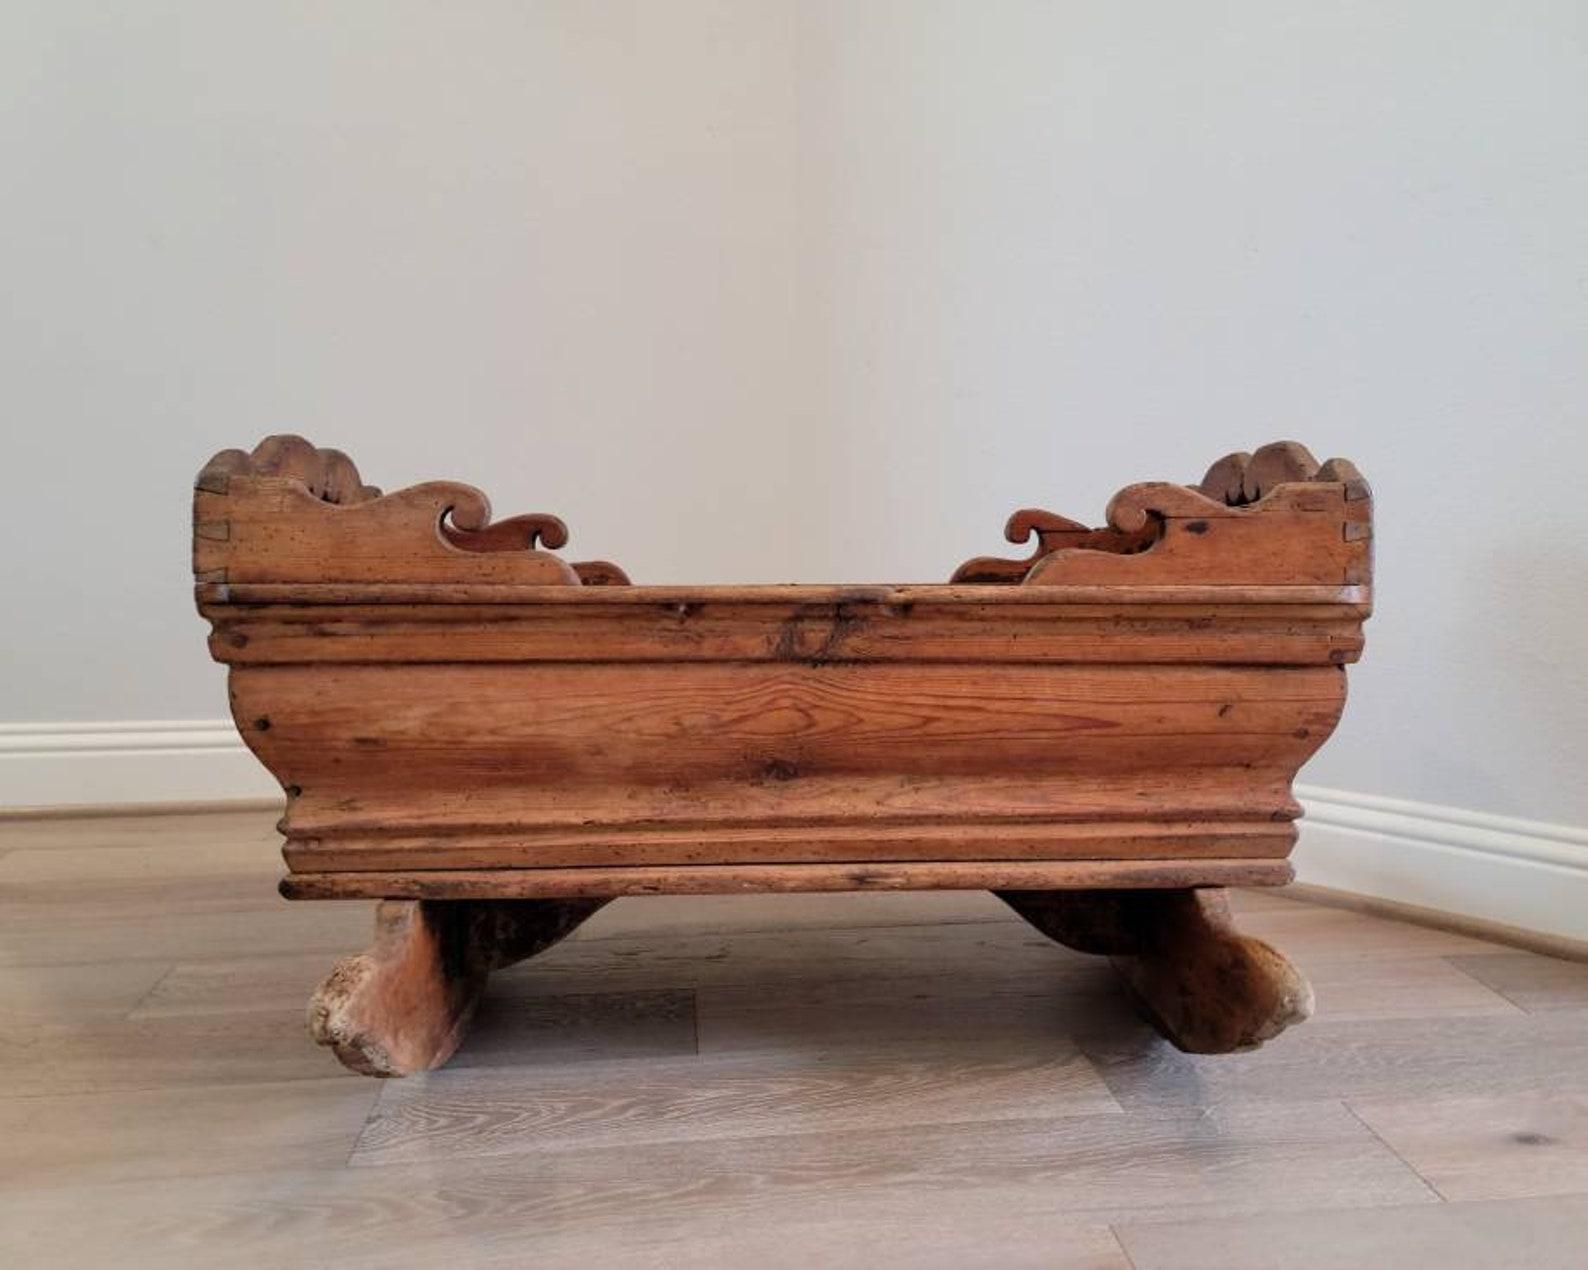 A scarce late 18th / early 19th century Gustavian Period country Swedish farmhouse pine bassinet / cradle with beautifully aged character and warm patina. 

Hand-crafted in Sweden, circa 1800, high quality rustic Scandinavian craftsmanship,